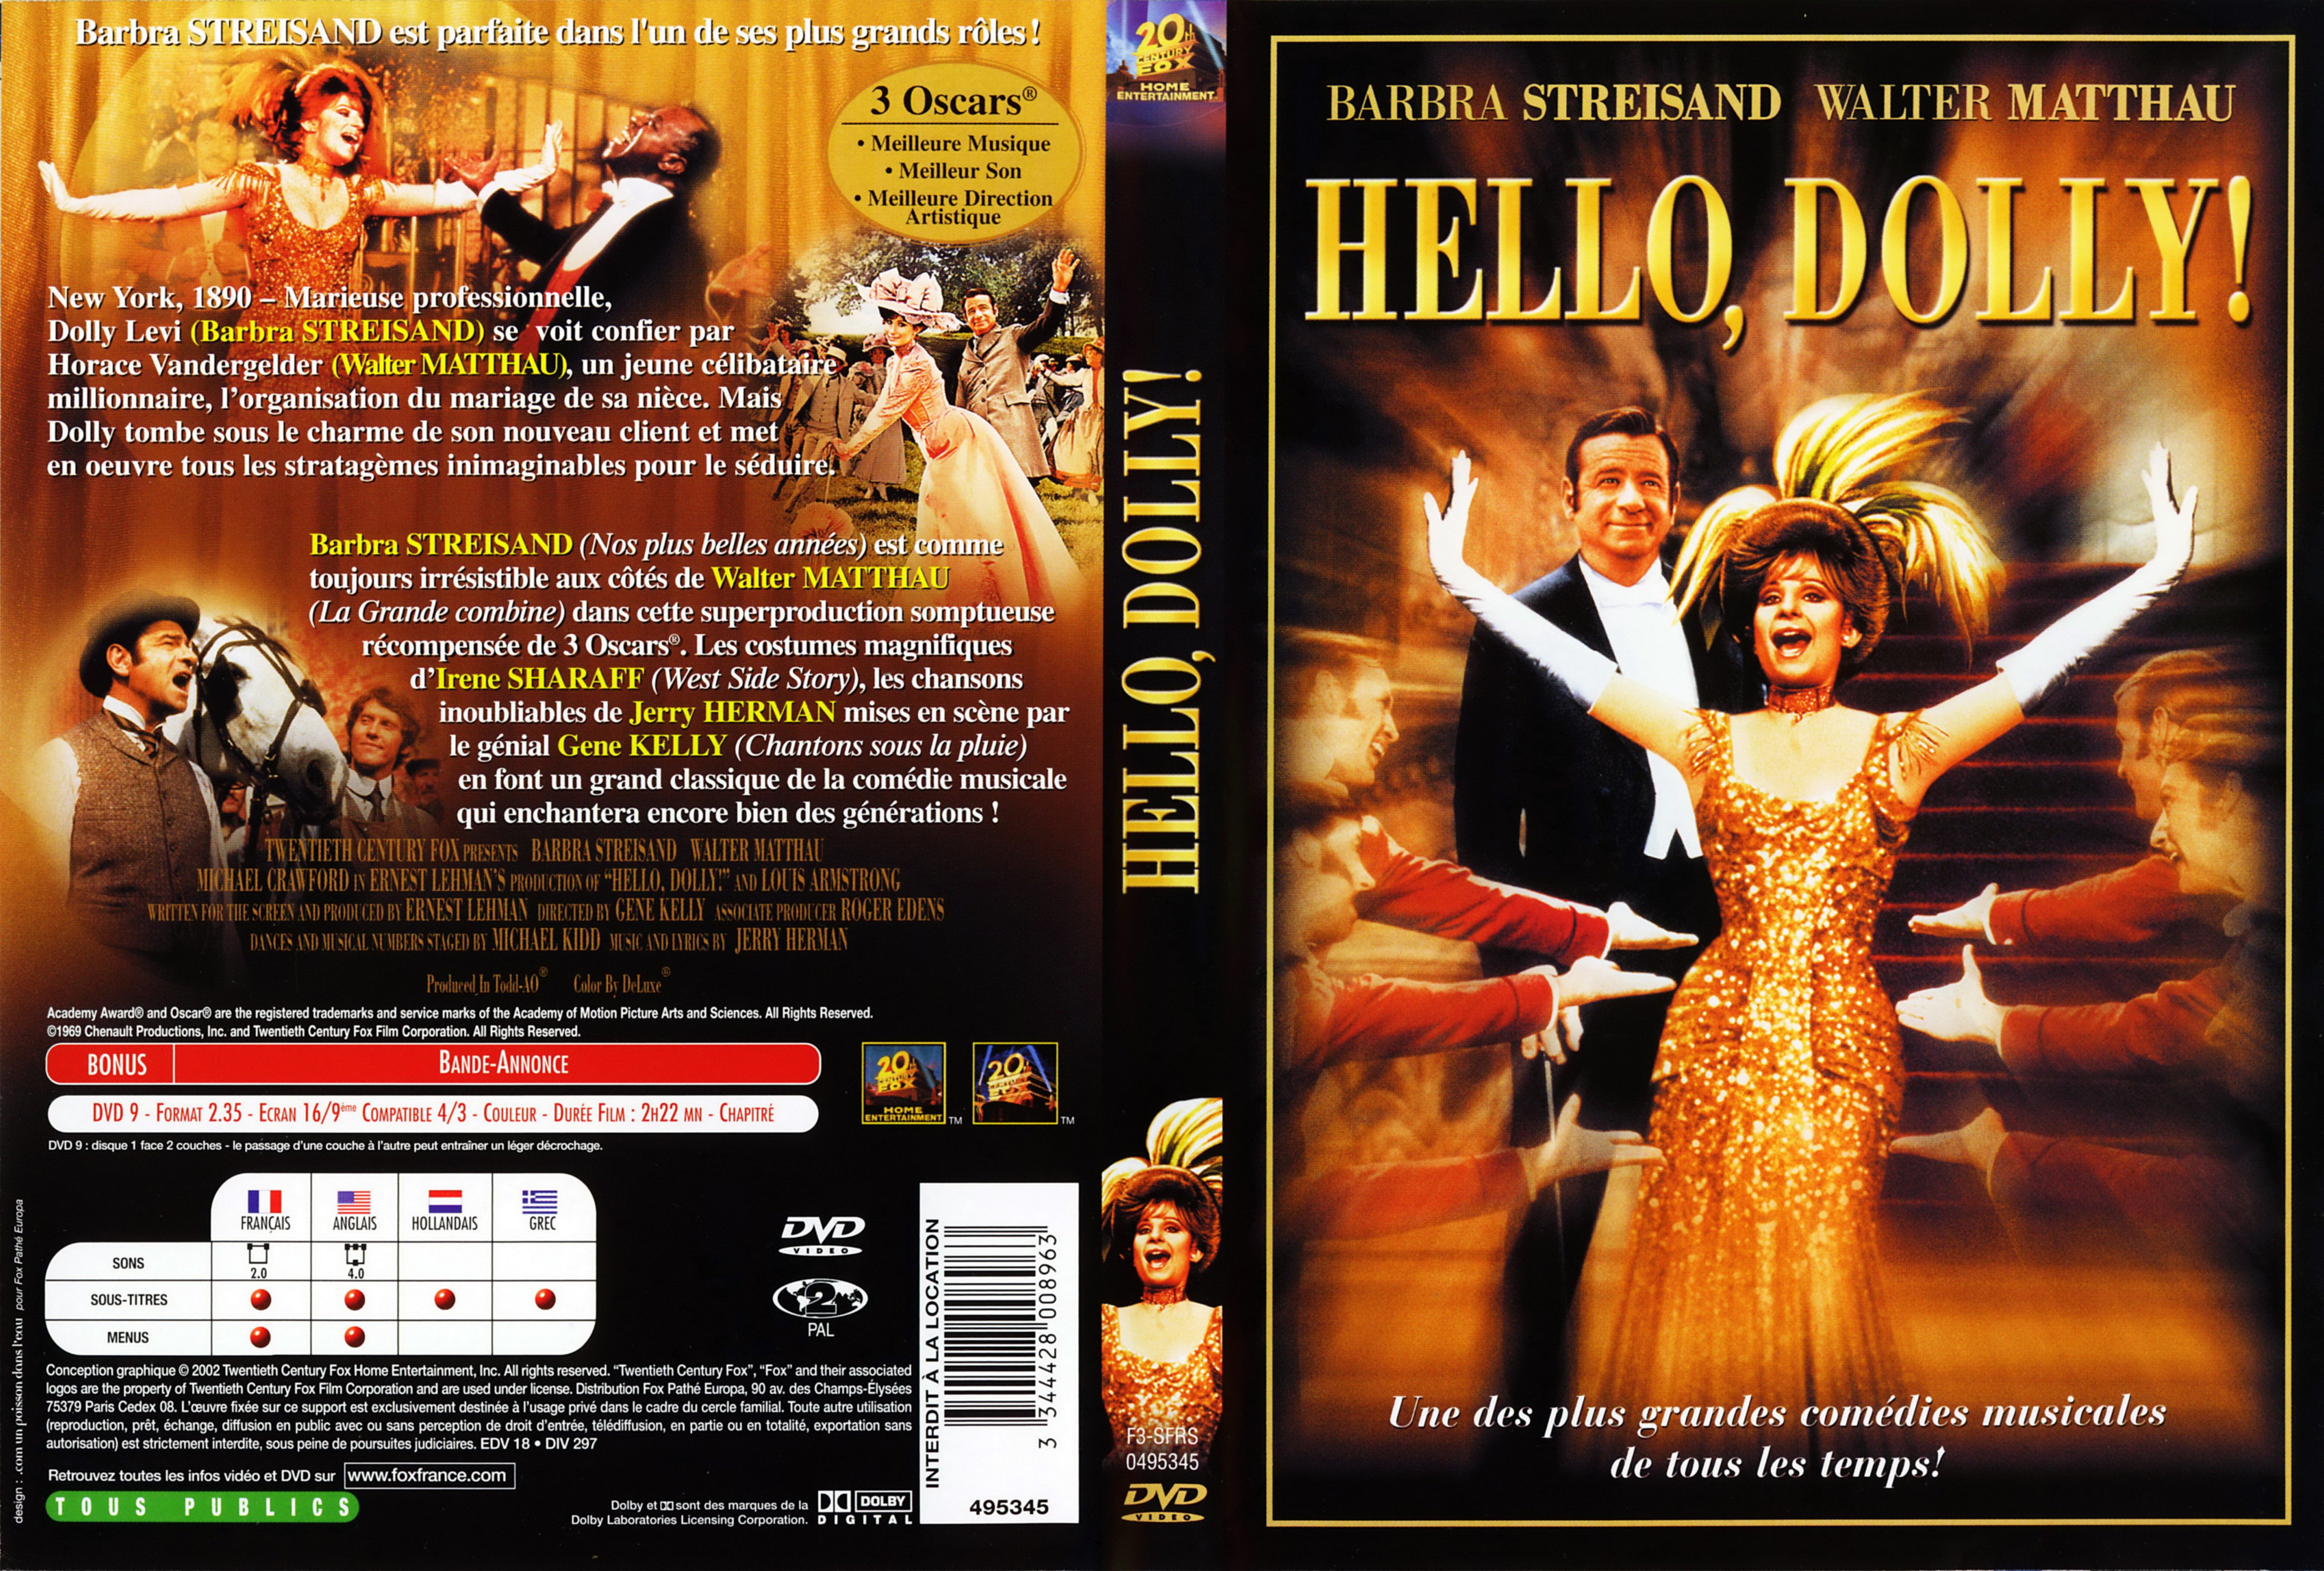 Jaquette DVD Hello Dolly v2